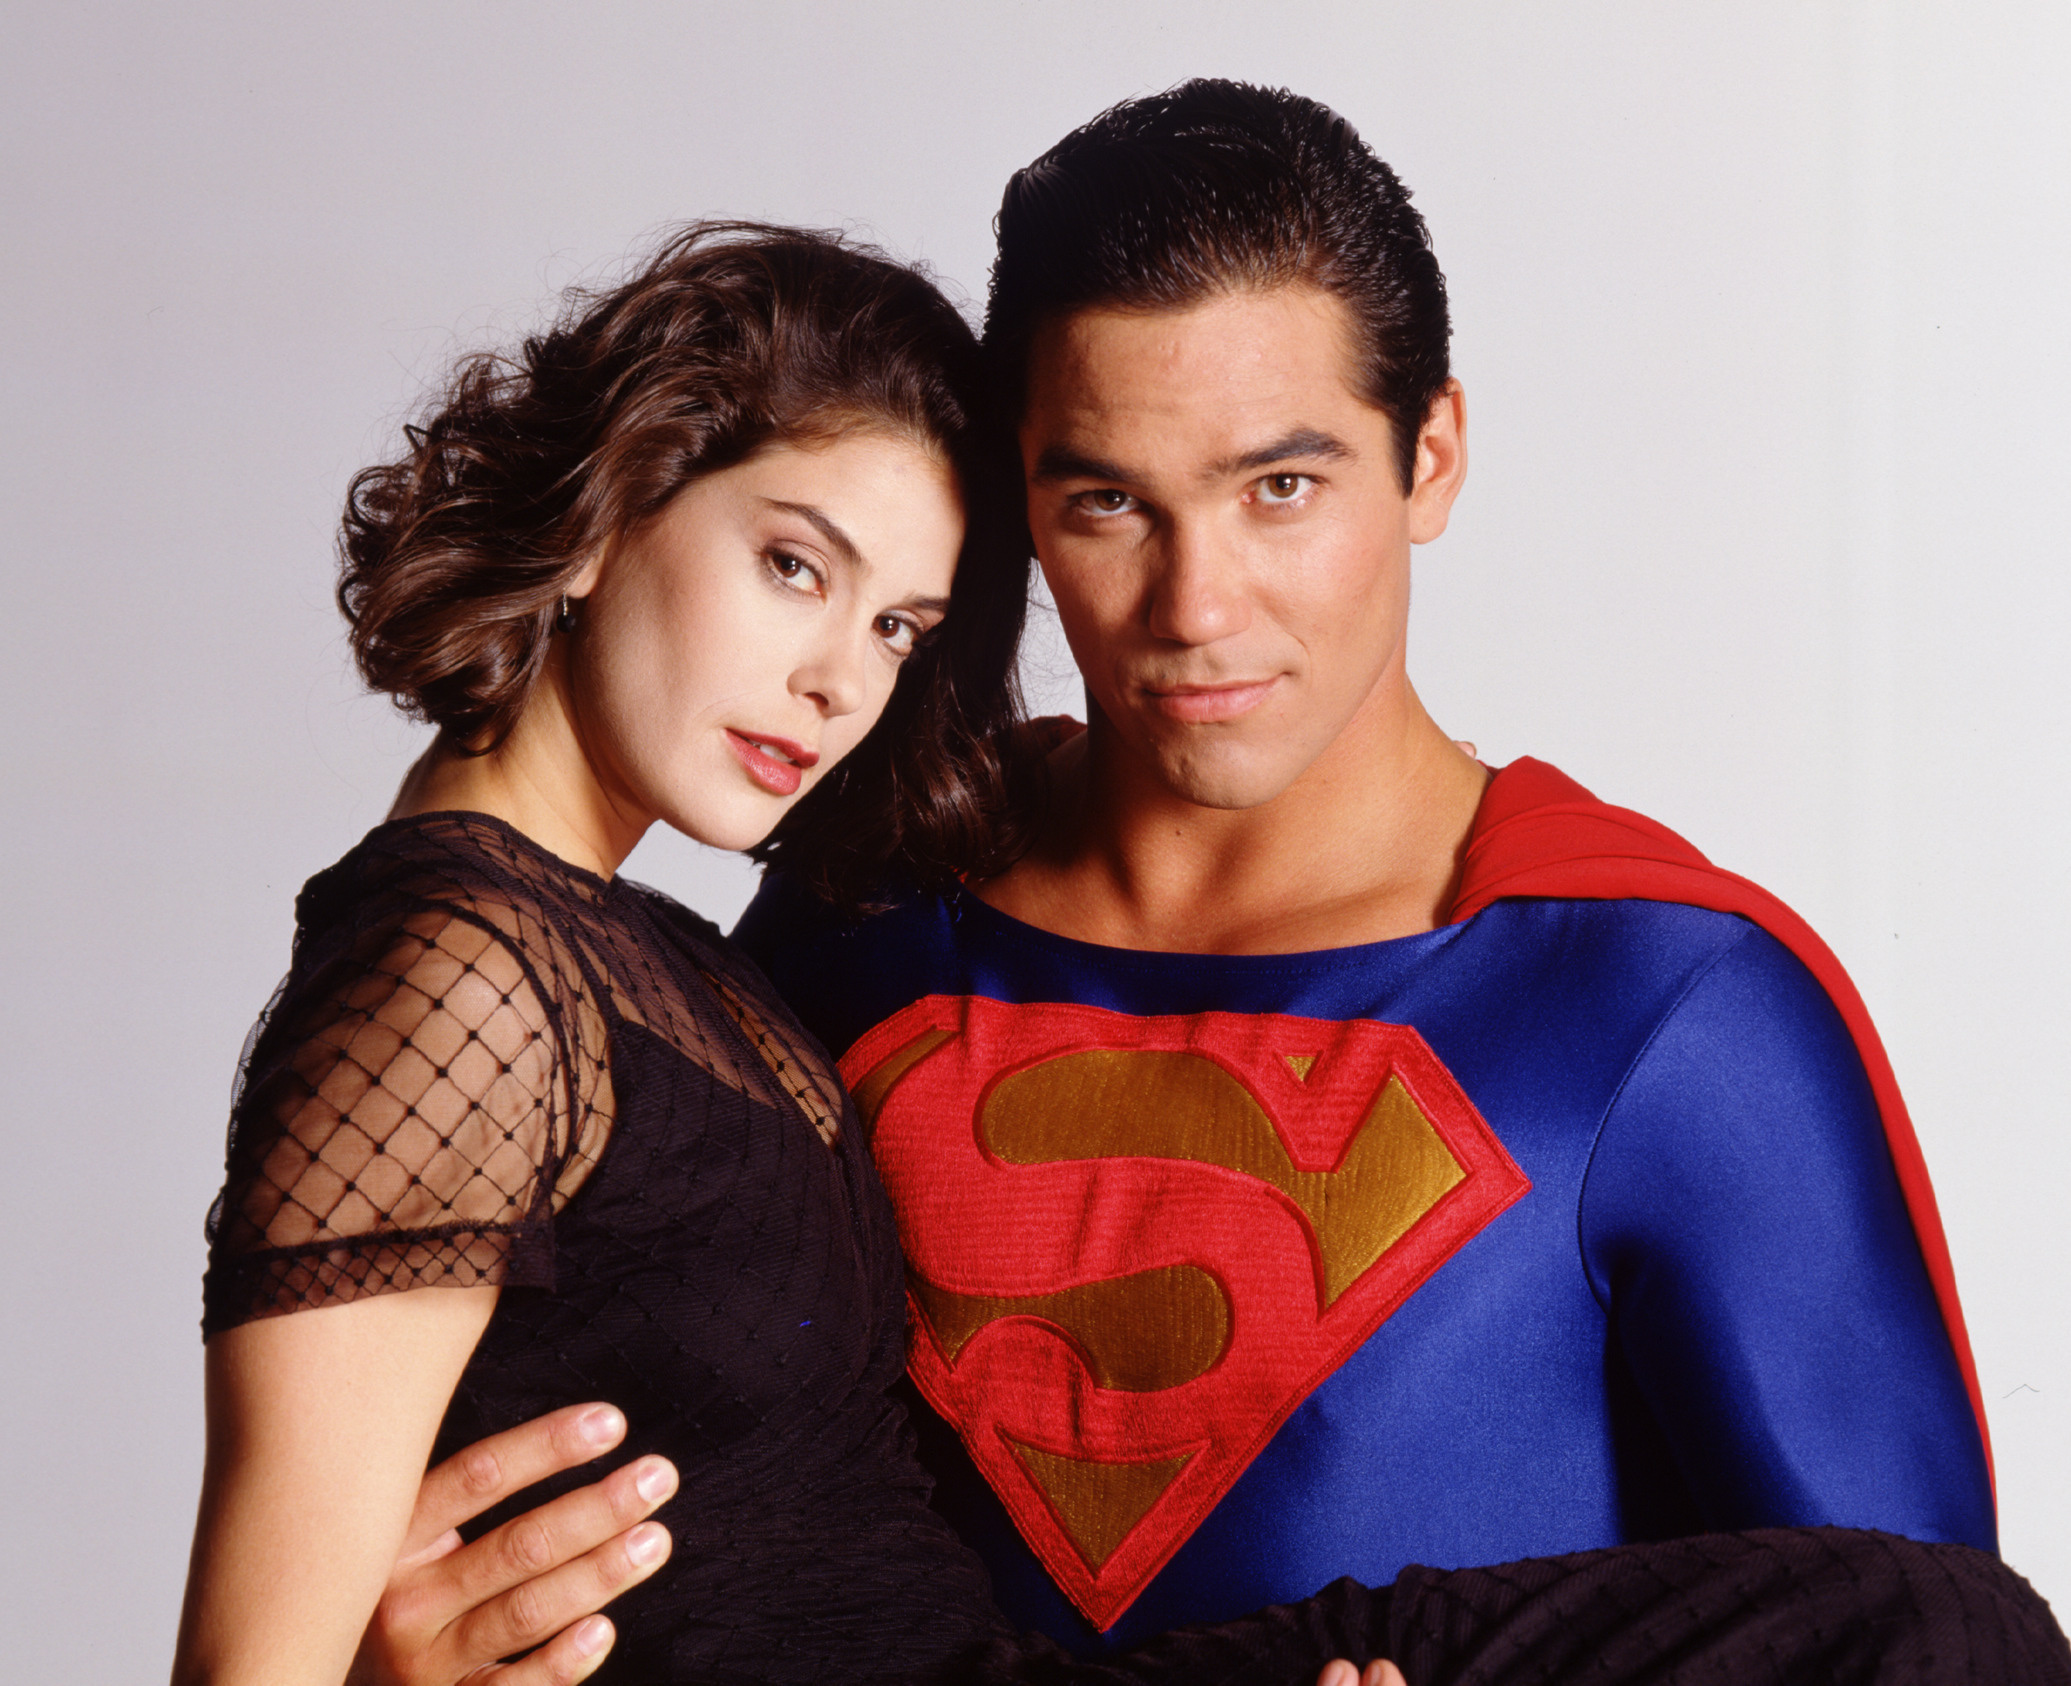 Lois and Clark: The New Adventures of Superman: Dean Cain and Teri Hatcher, The only actors to appear in all 87 episodes of the series. 2080x1690 HD Background.